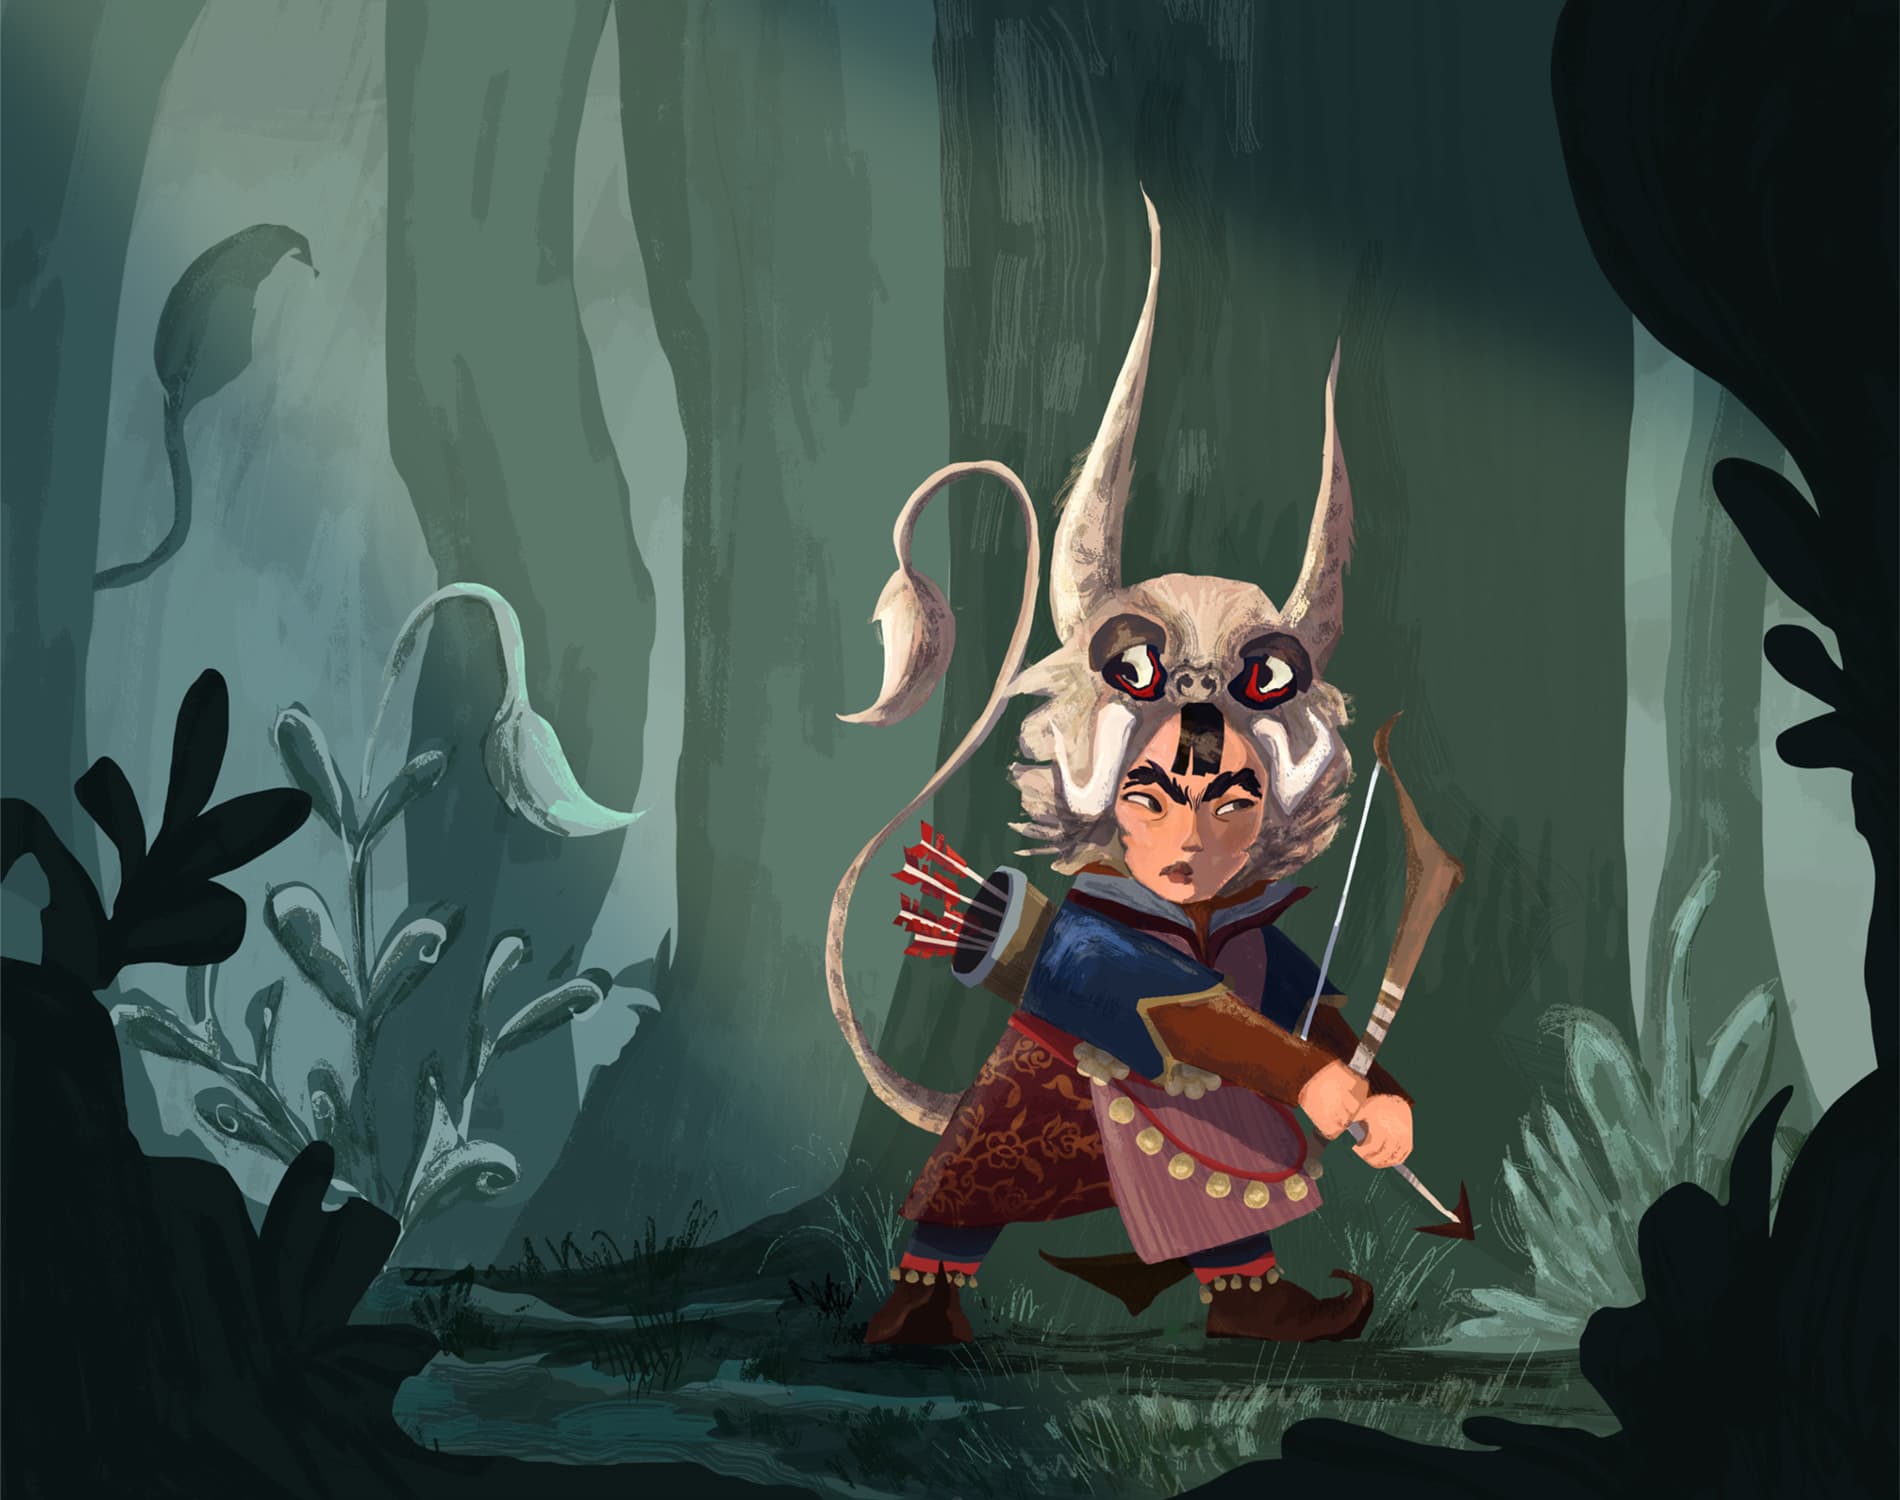 Character design illustration of a little warrior holding a bow and arrow in the forest